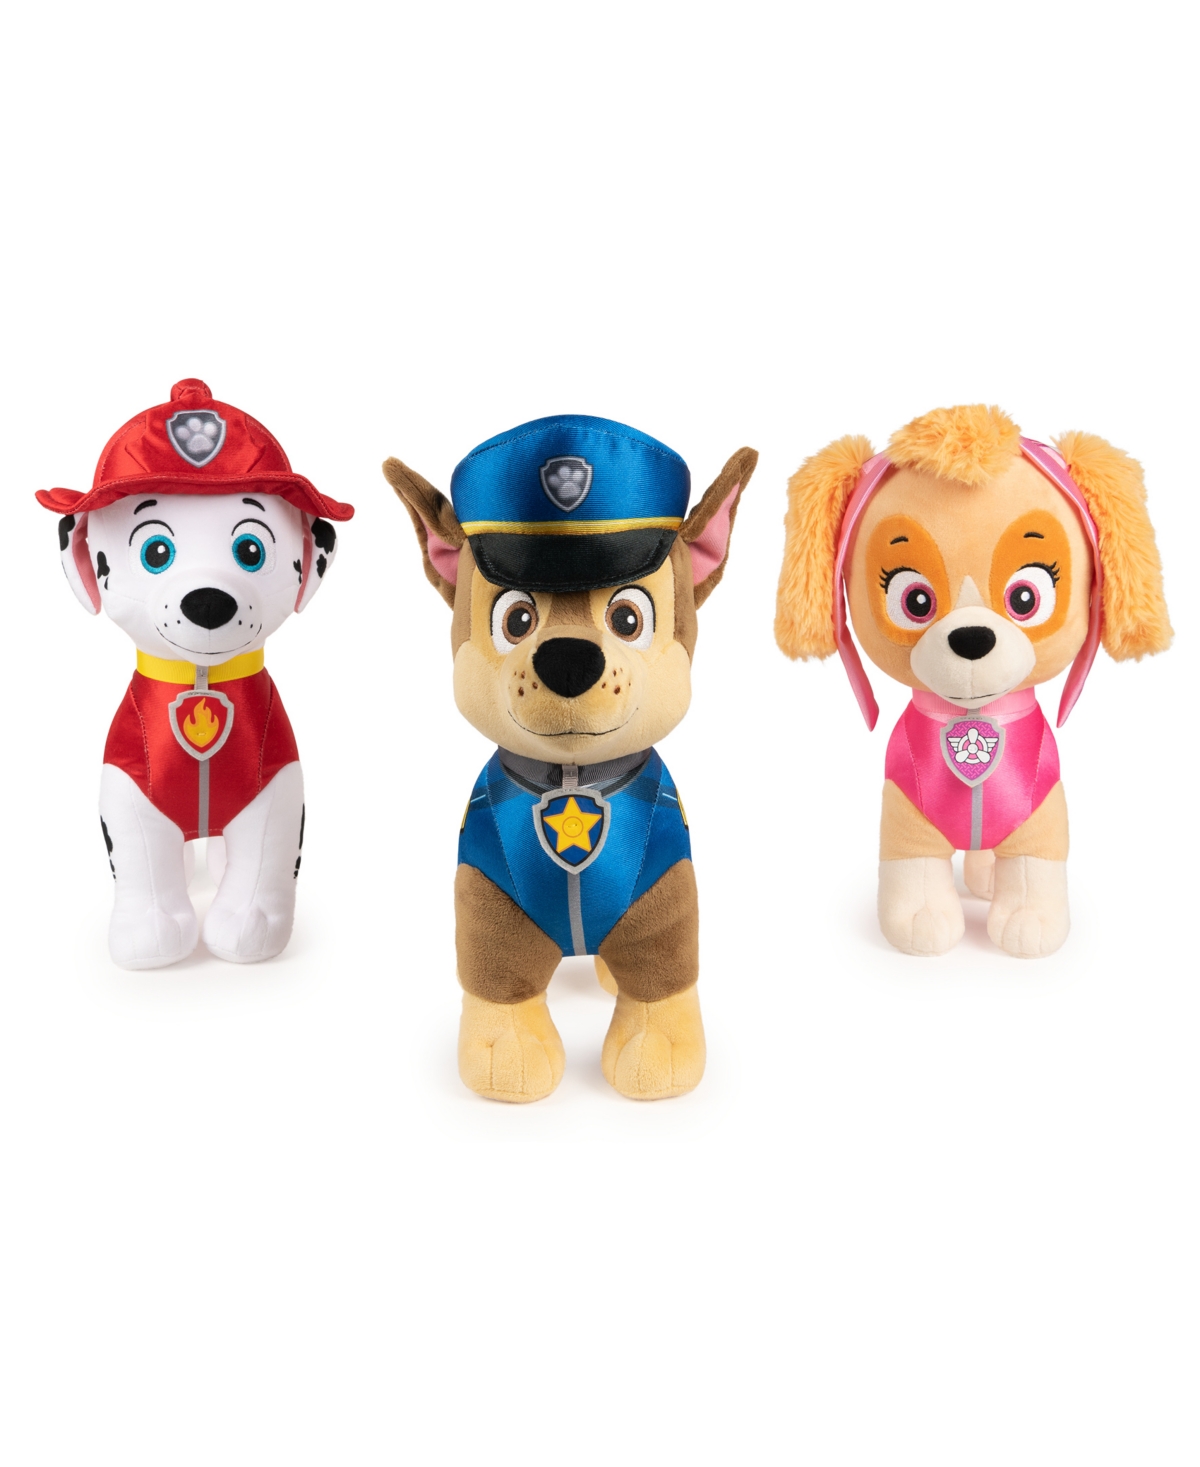 Shop Paw Patrol Chase In Heroic Standing Position Premium Stuffed Animal Plush Toy In Multi-color